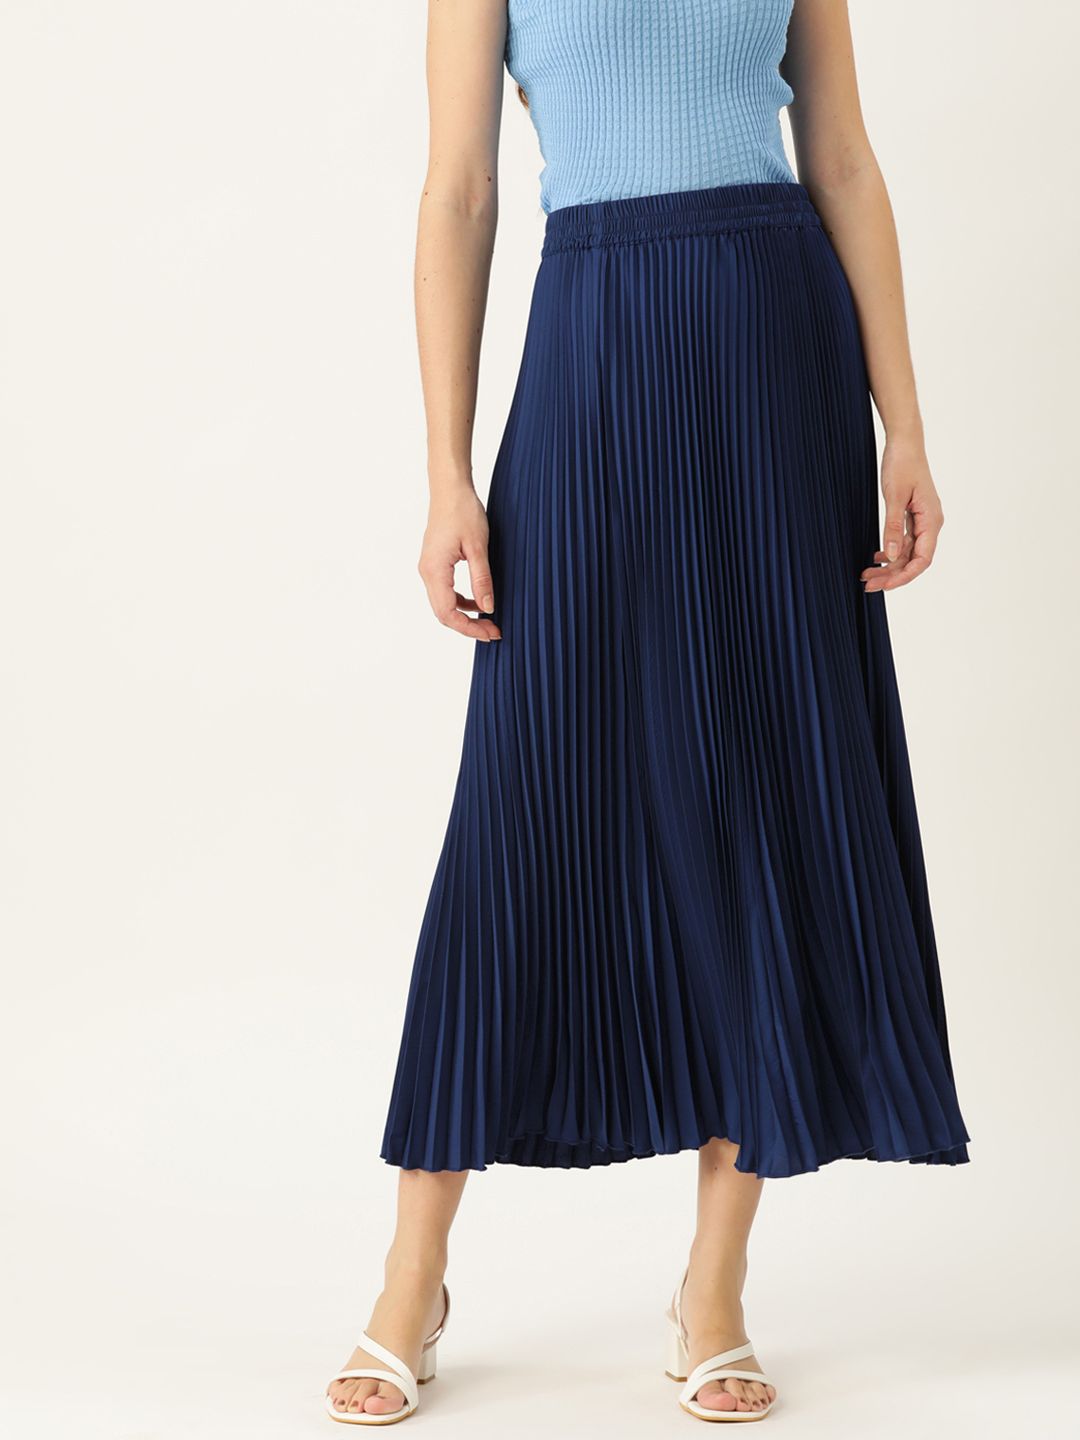 WISSTLER Solid Pleated Flared Midi Skirt Price in India